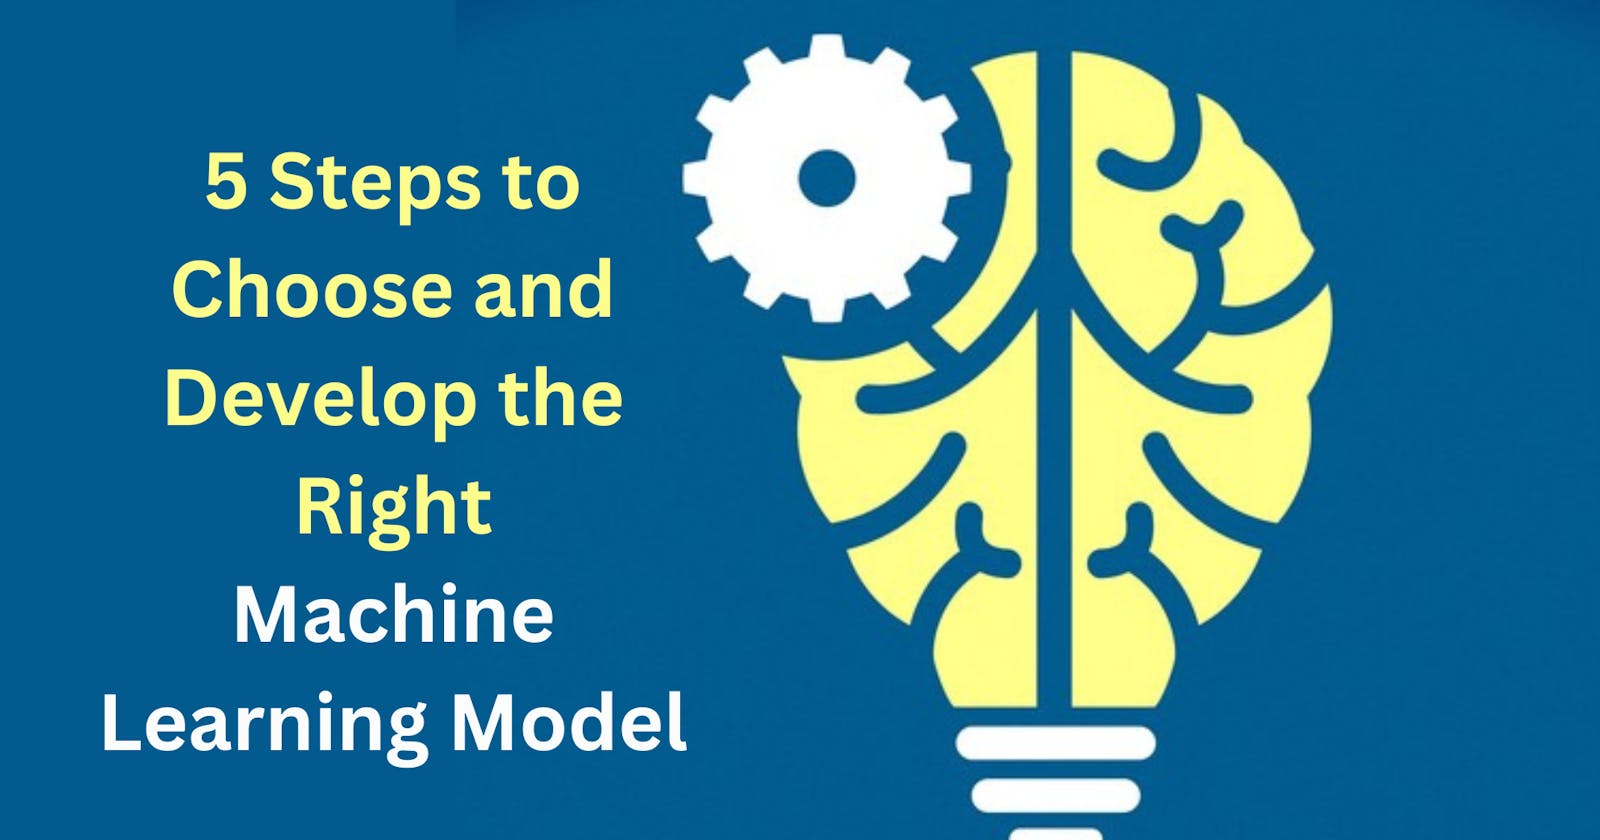 5 Steps to Choose and Develop the Right Machine Learning Model